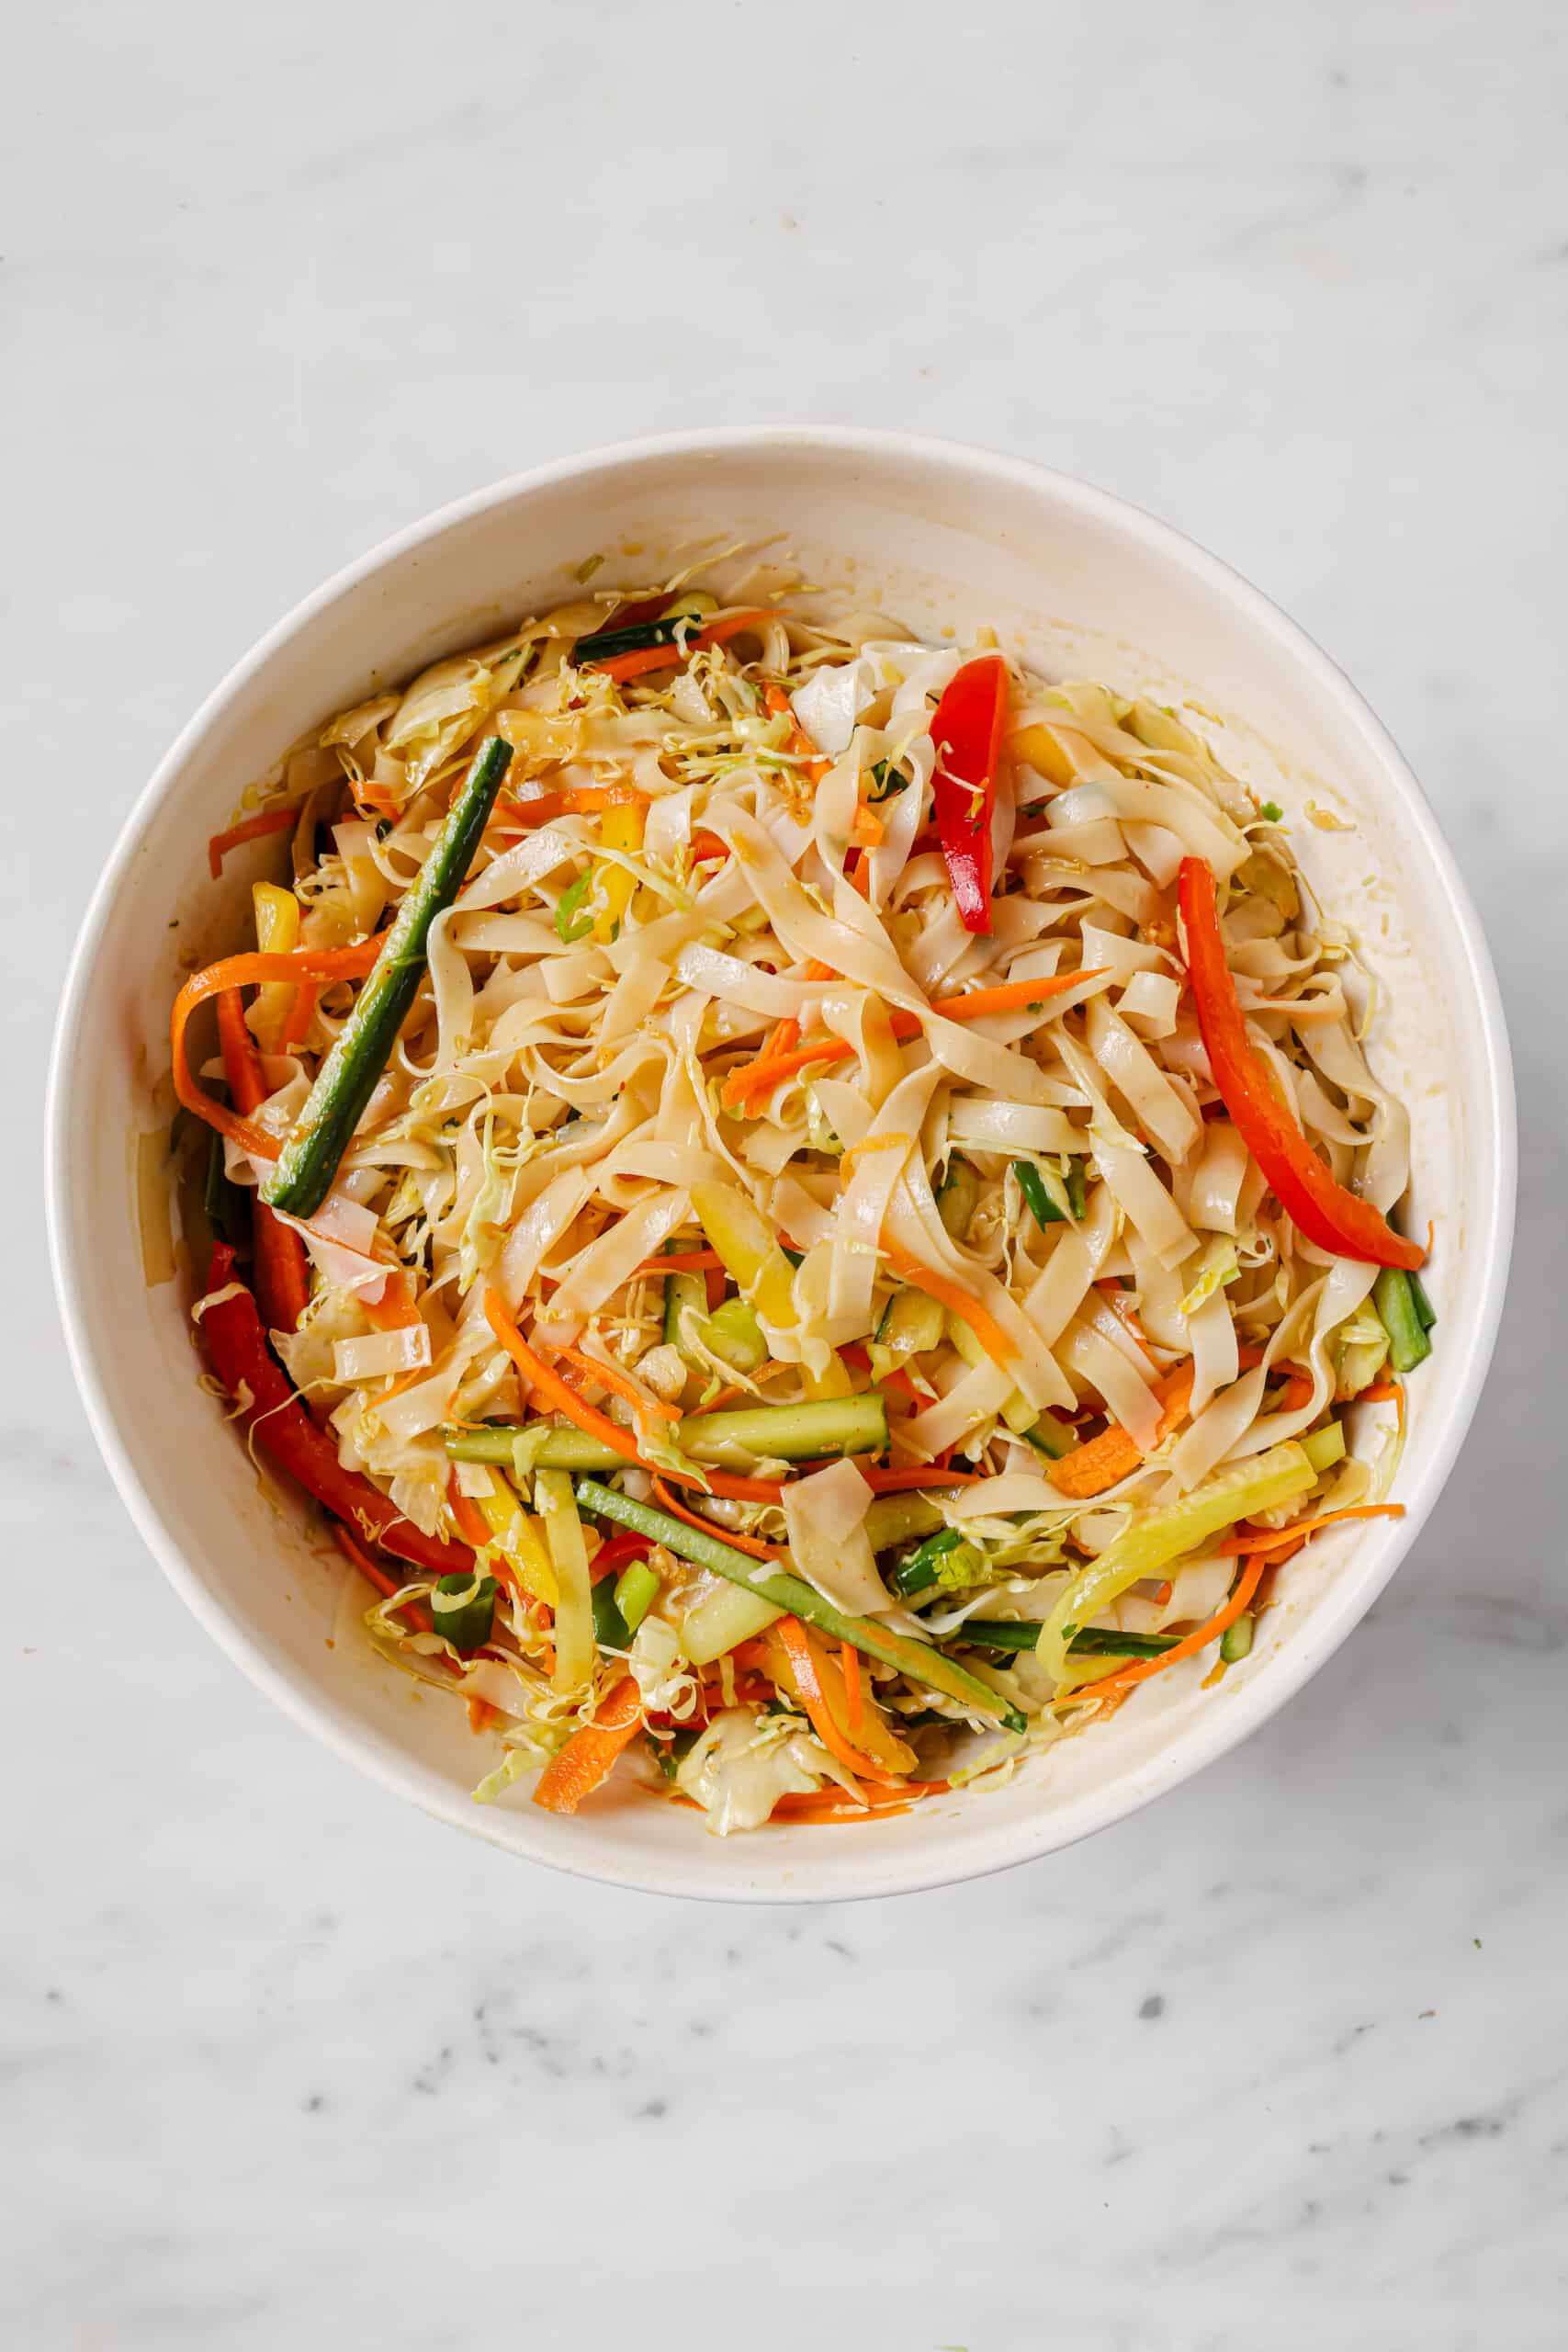 Tossed noodles with veggies and dressing. 